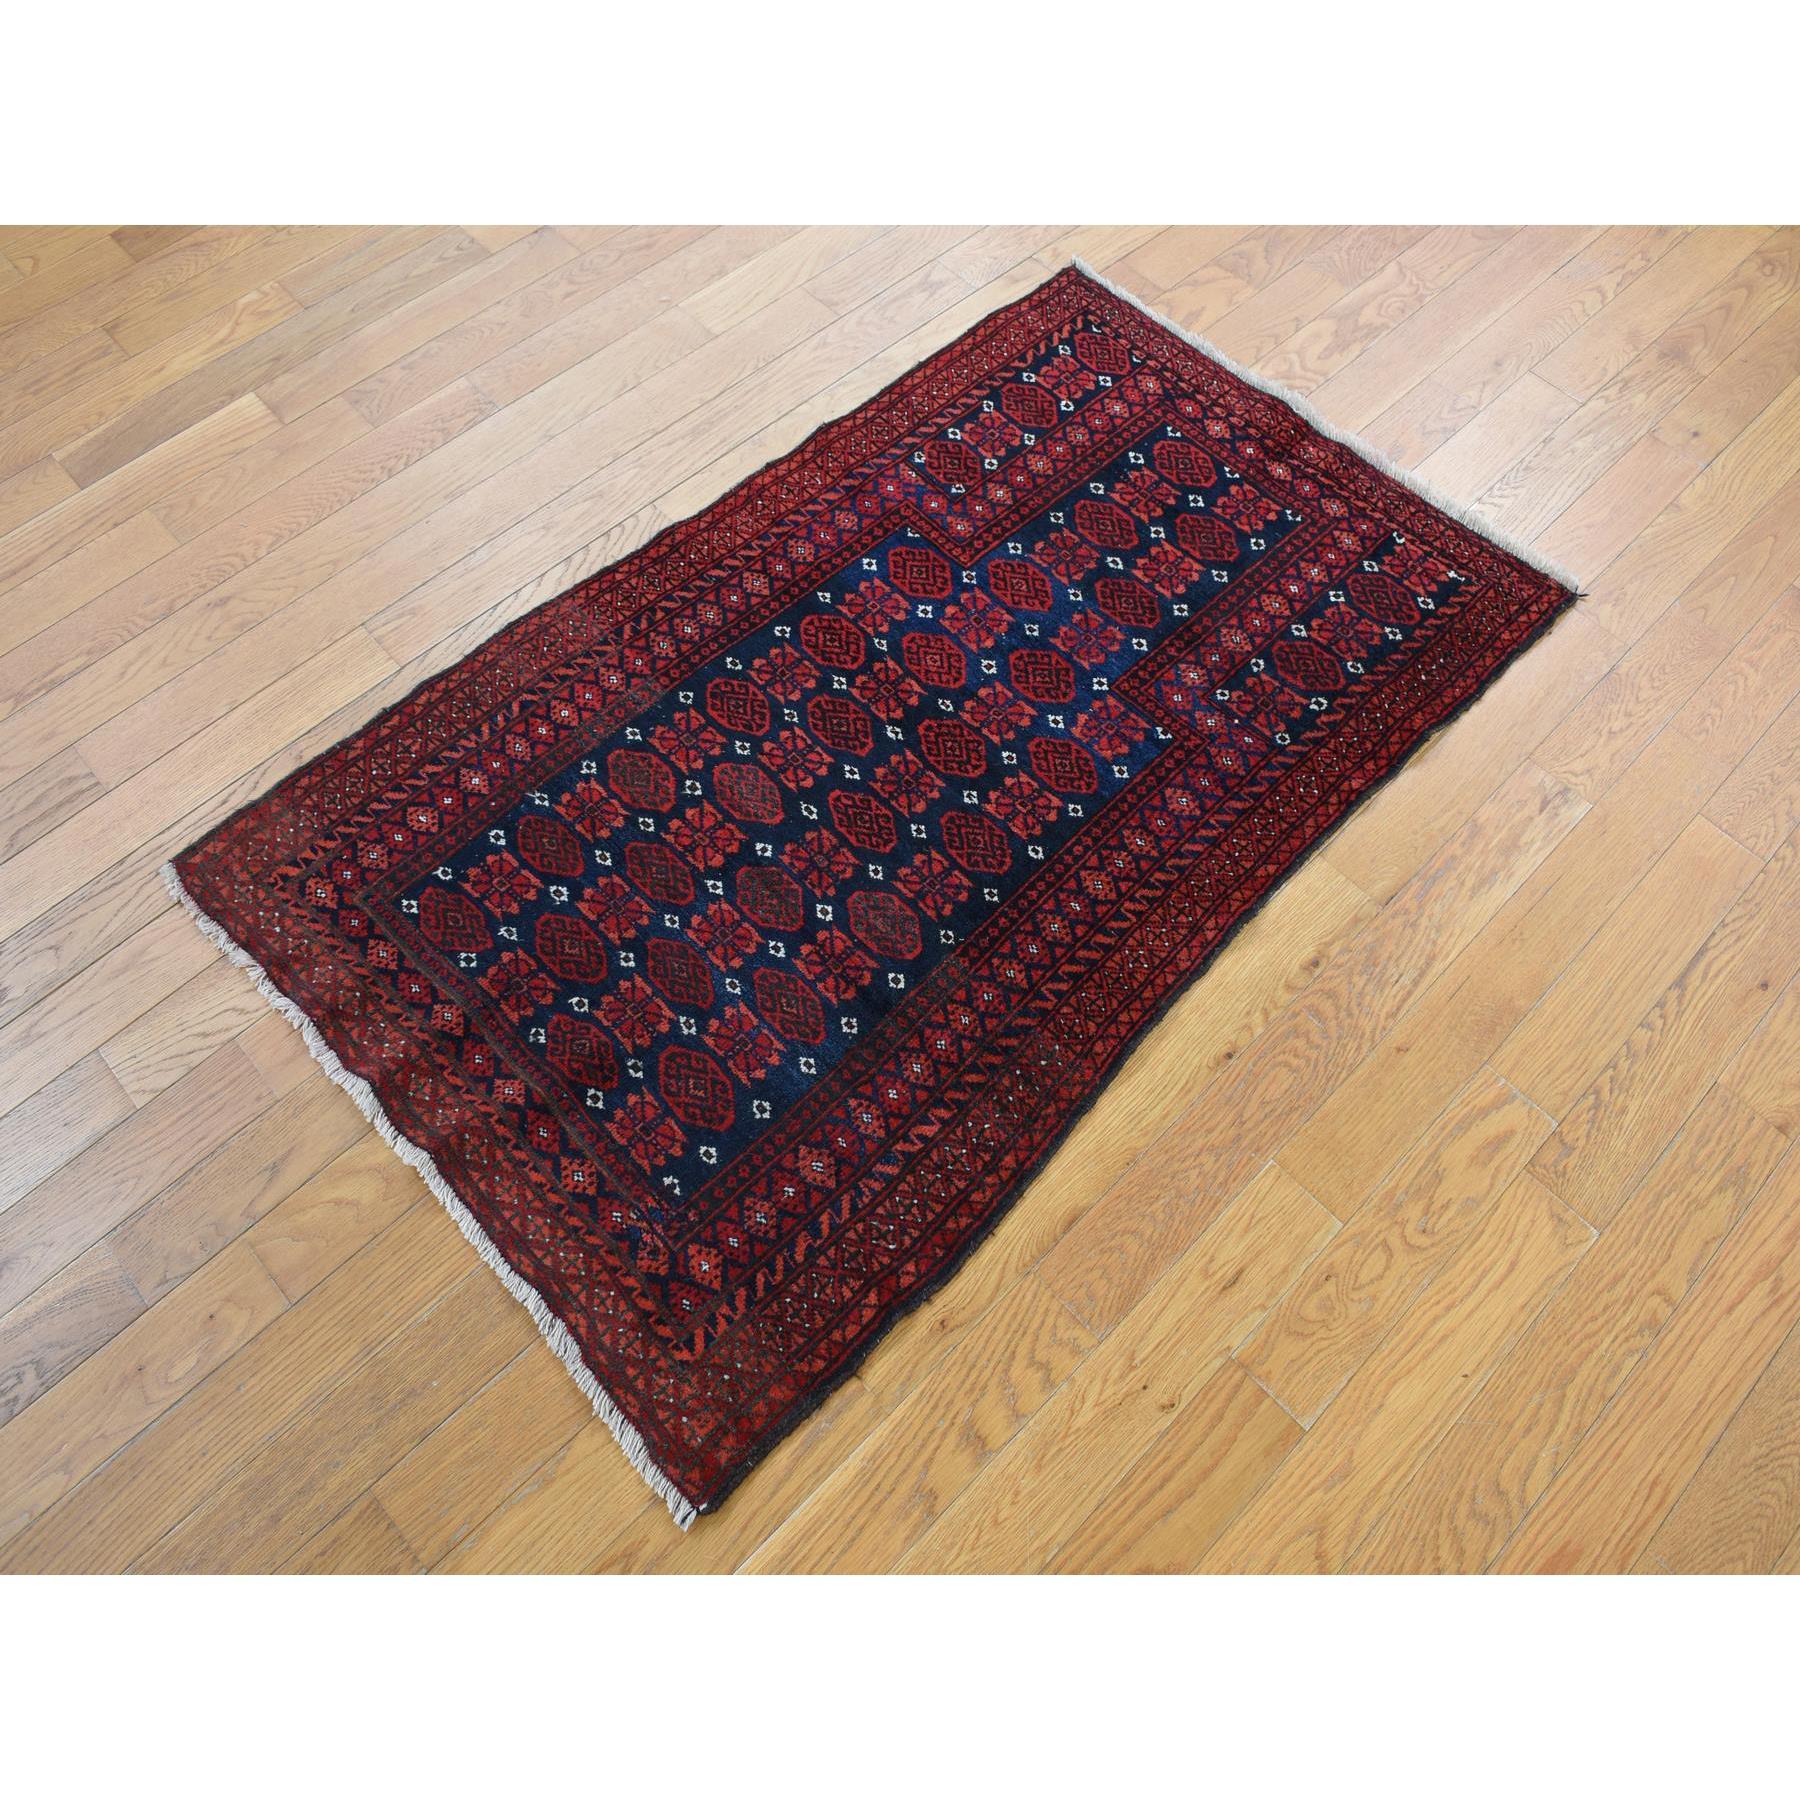 This fabulous Hand-Knotted carpet has been created and designed for extra strength and durability. This rug has been handcrafted for weeks in the traditional method that is used to make
Exact Rug Size in Feet and Inches : 2'7